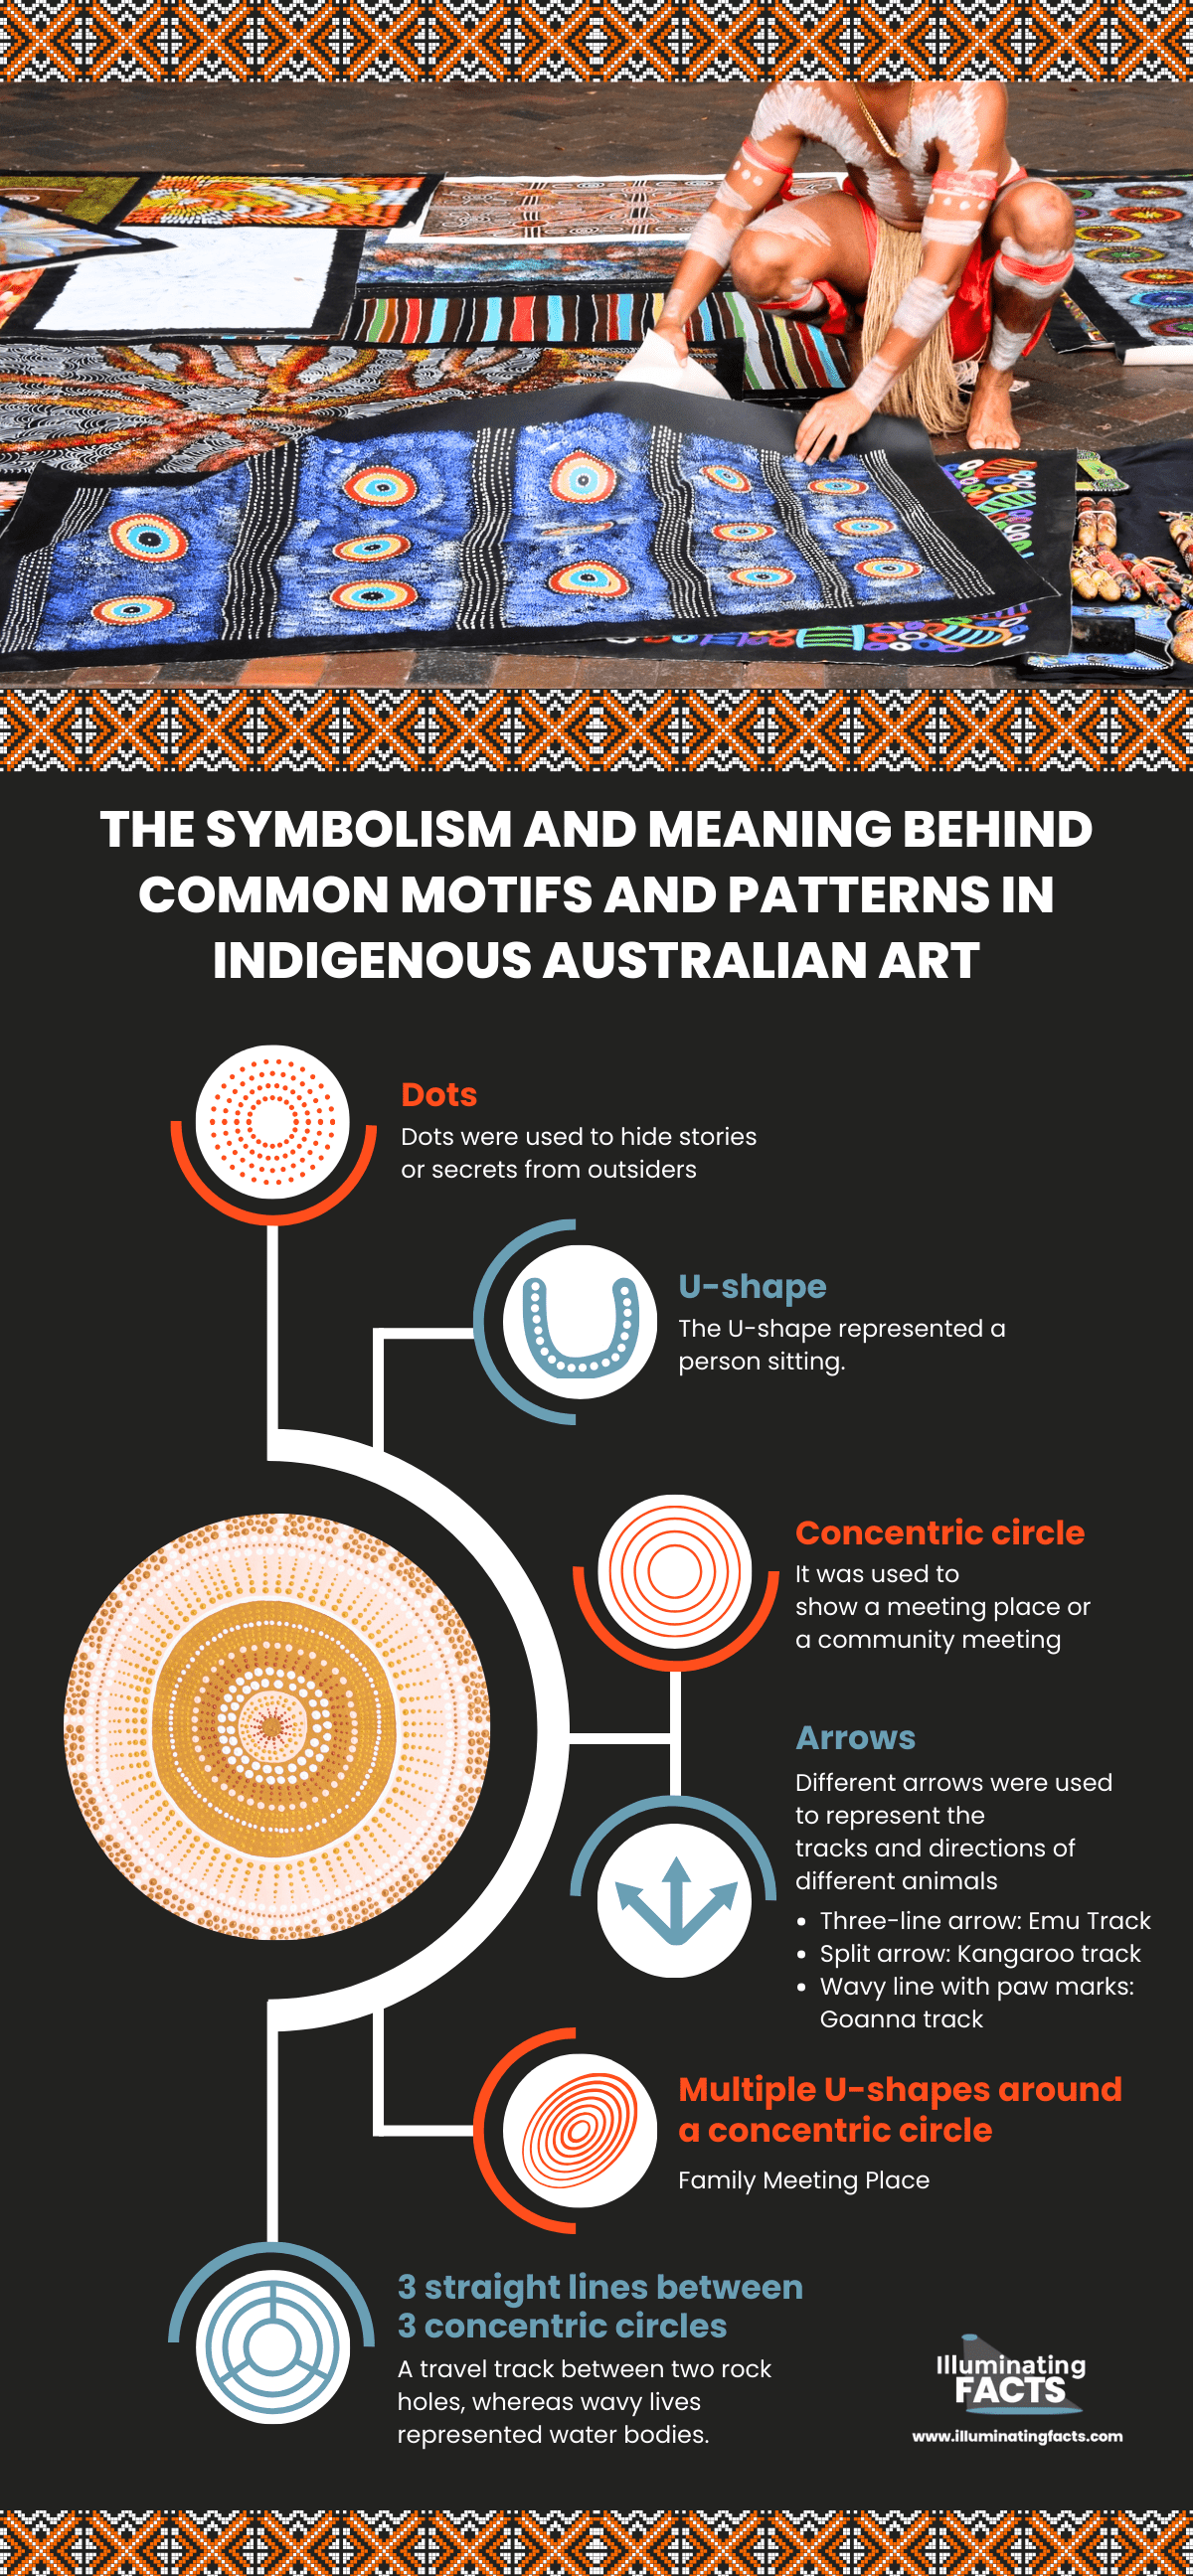 The symbolism and meaning behind common motifs and patterns in Indigenous Australian art